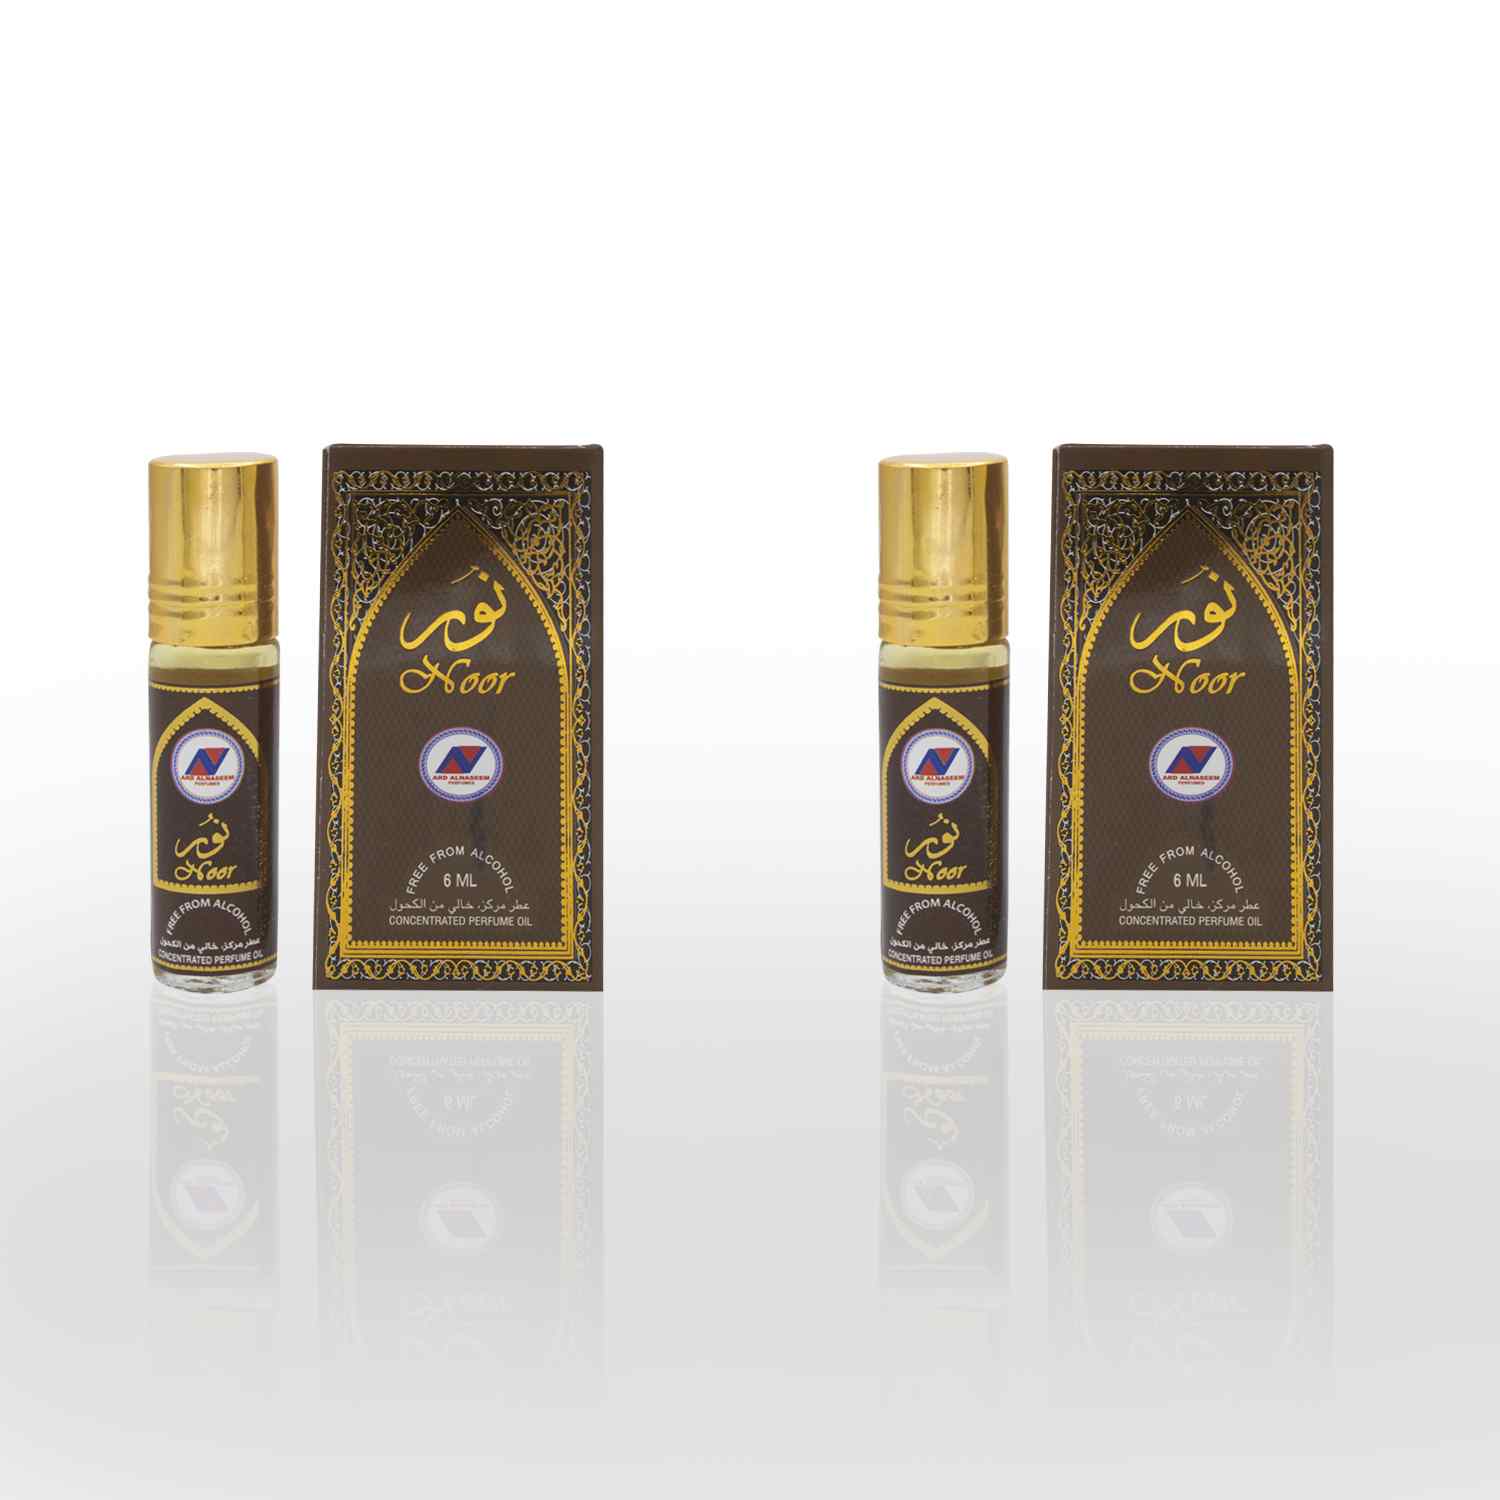 Noor concentrated oil attar rollon 6ml by Ard perfumes